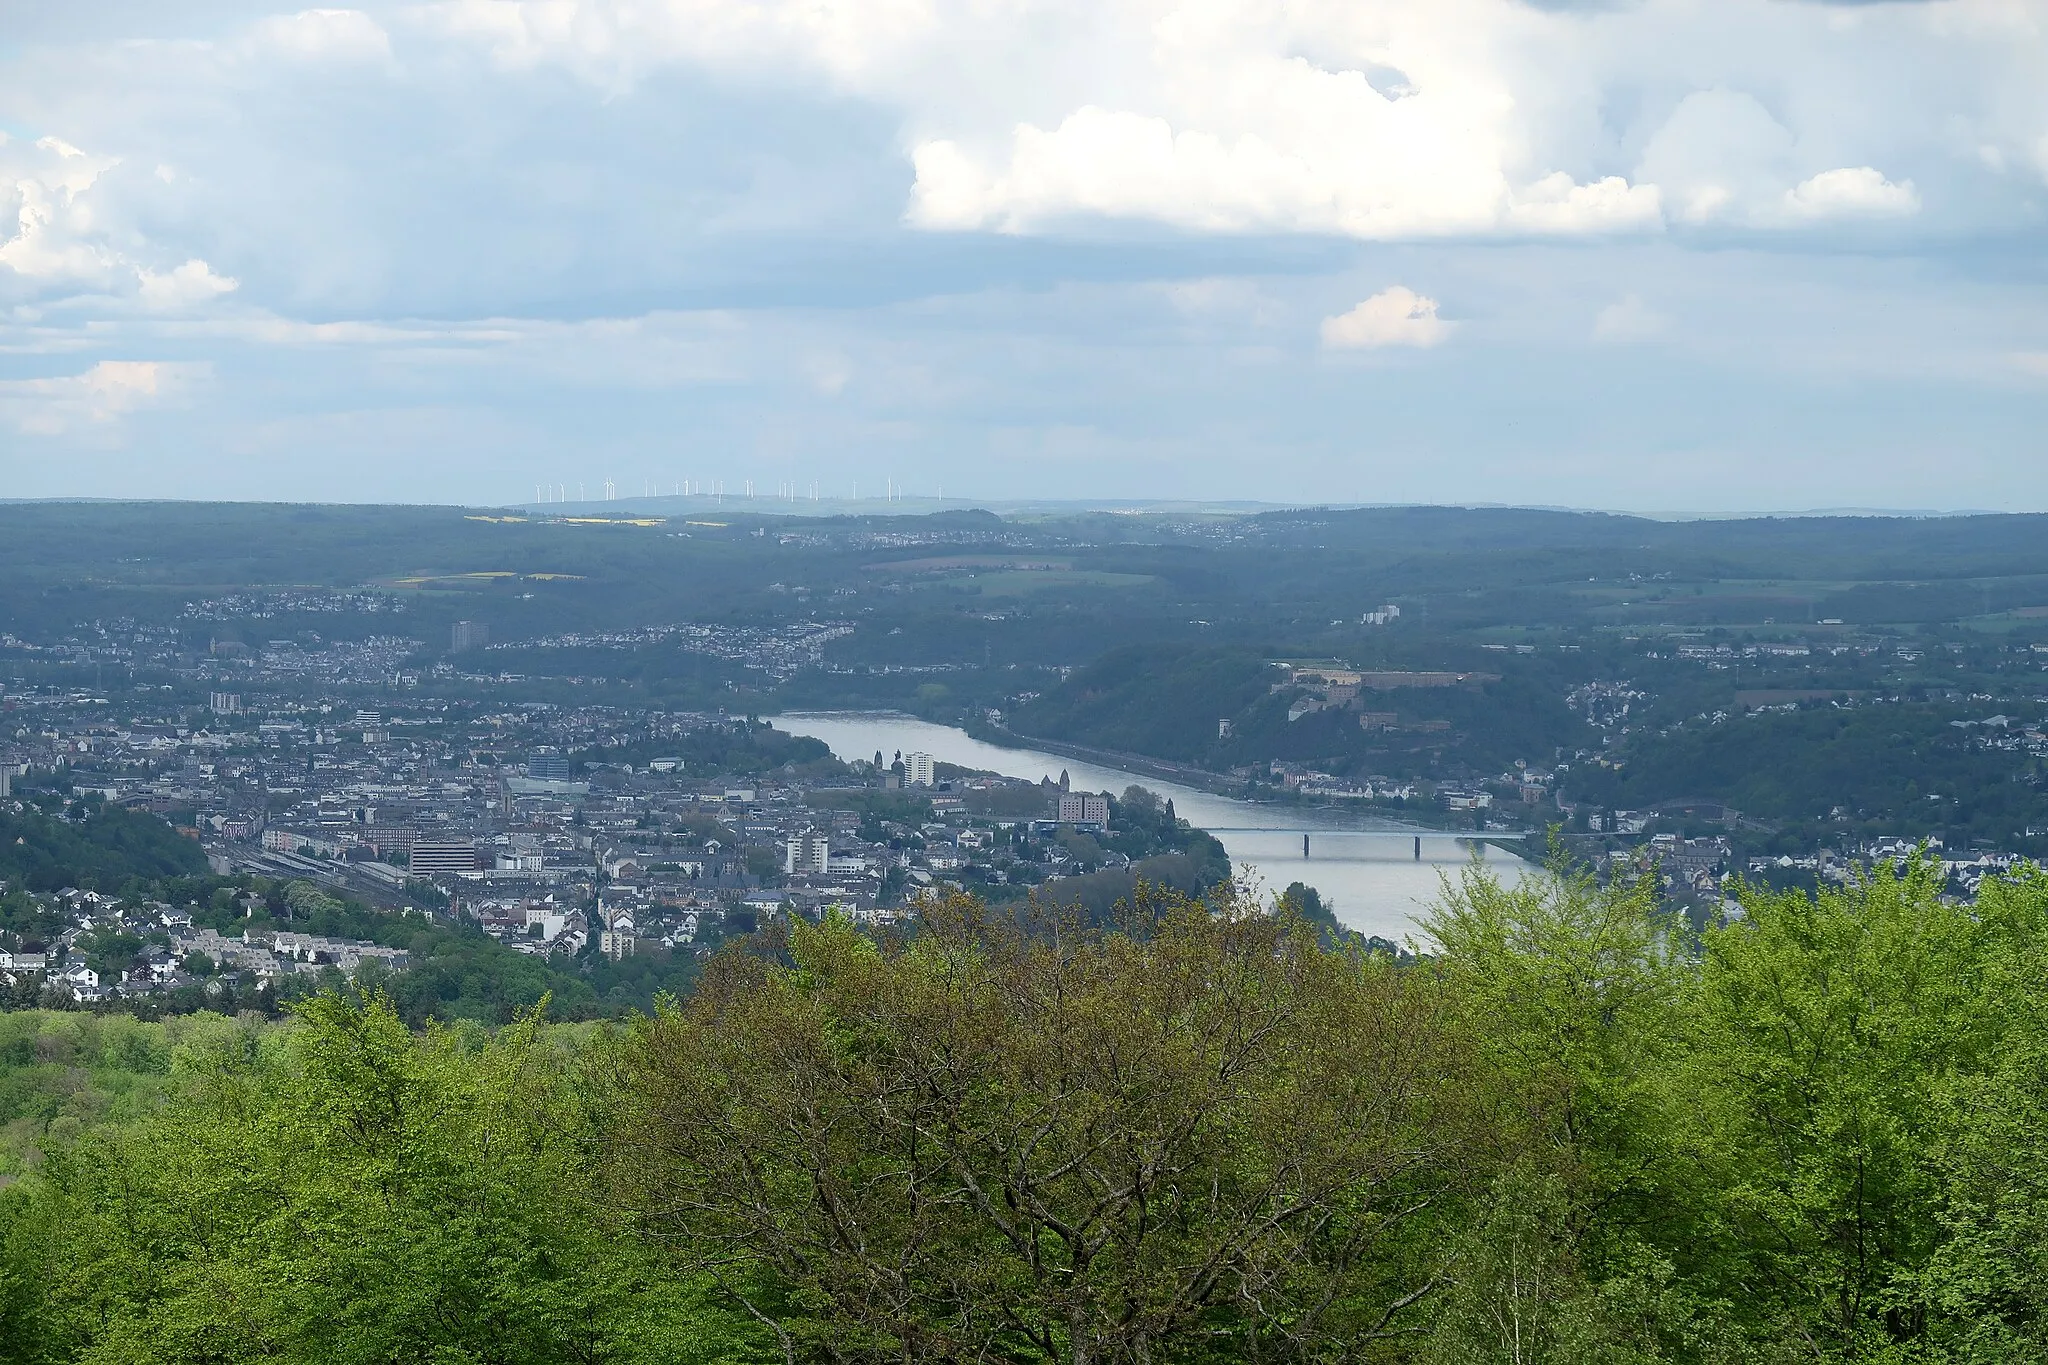 Photo showing: Koblenz as seen from the viewpoint on top of Kühkopf